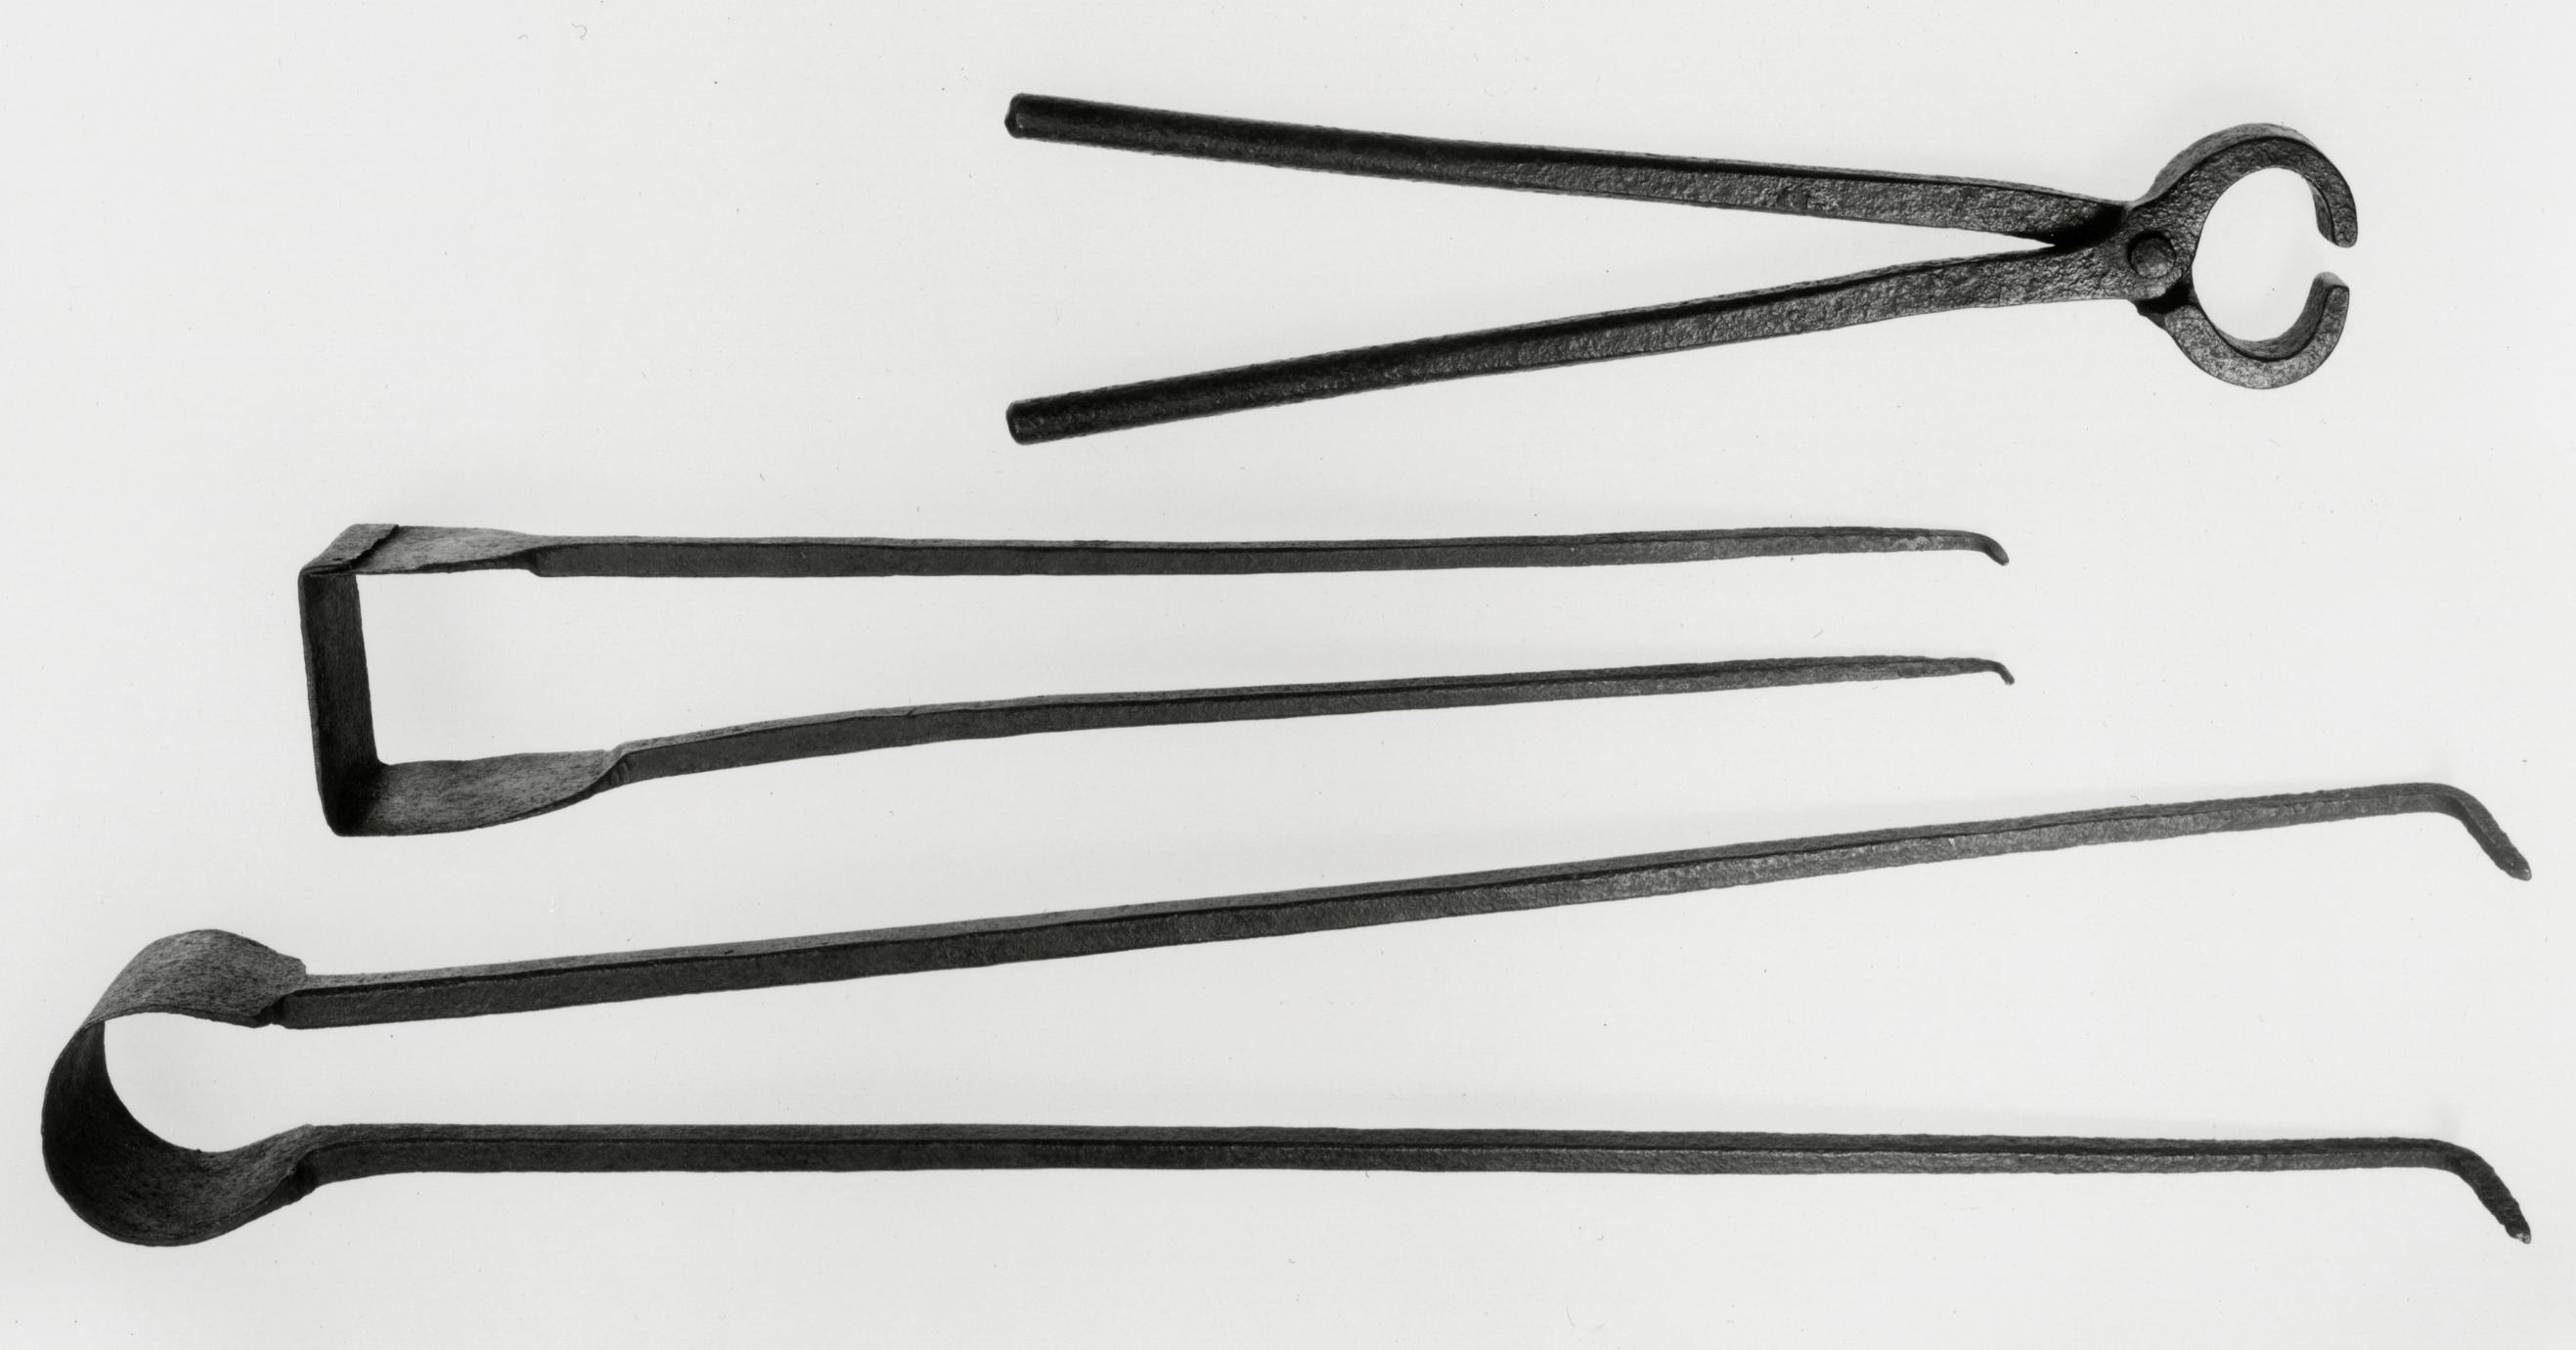 Black and white photograph of blacksmith's and metalworker's tongs.